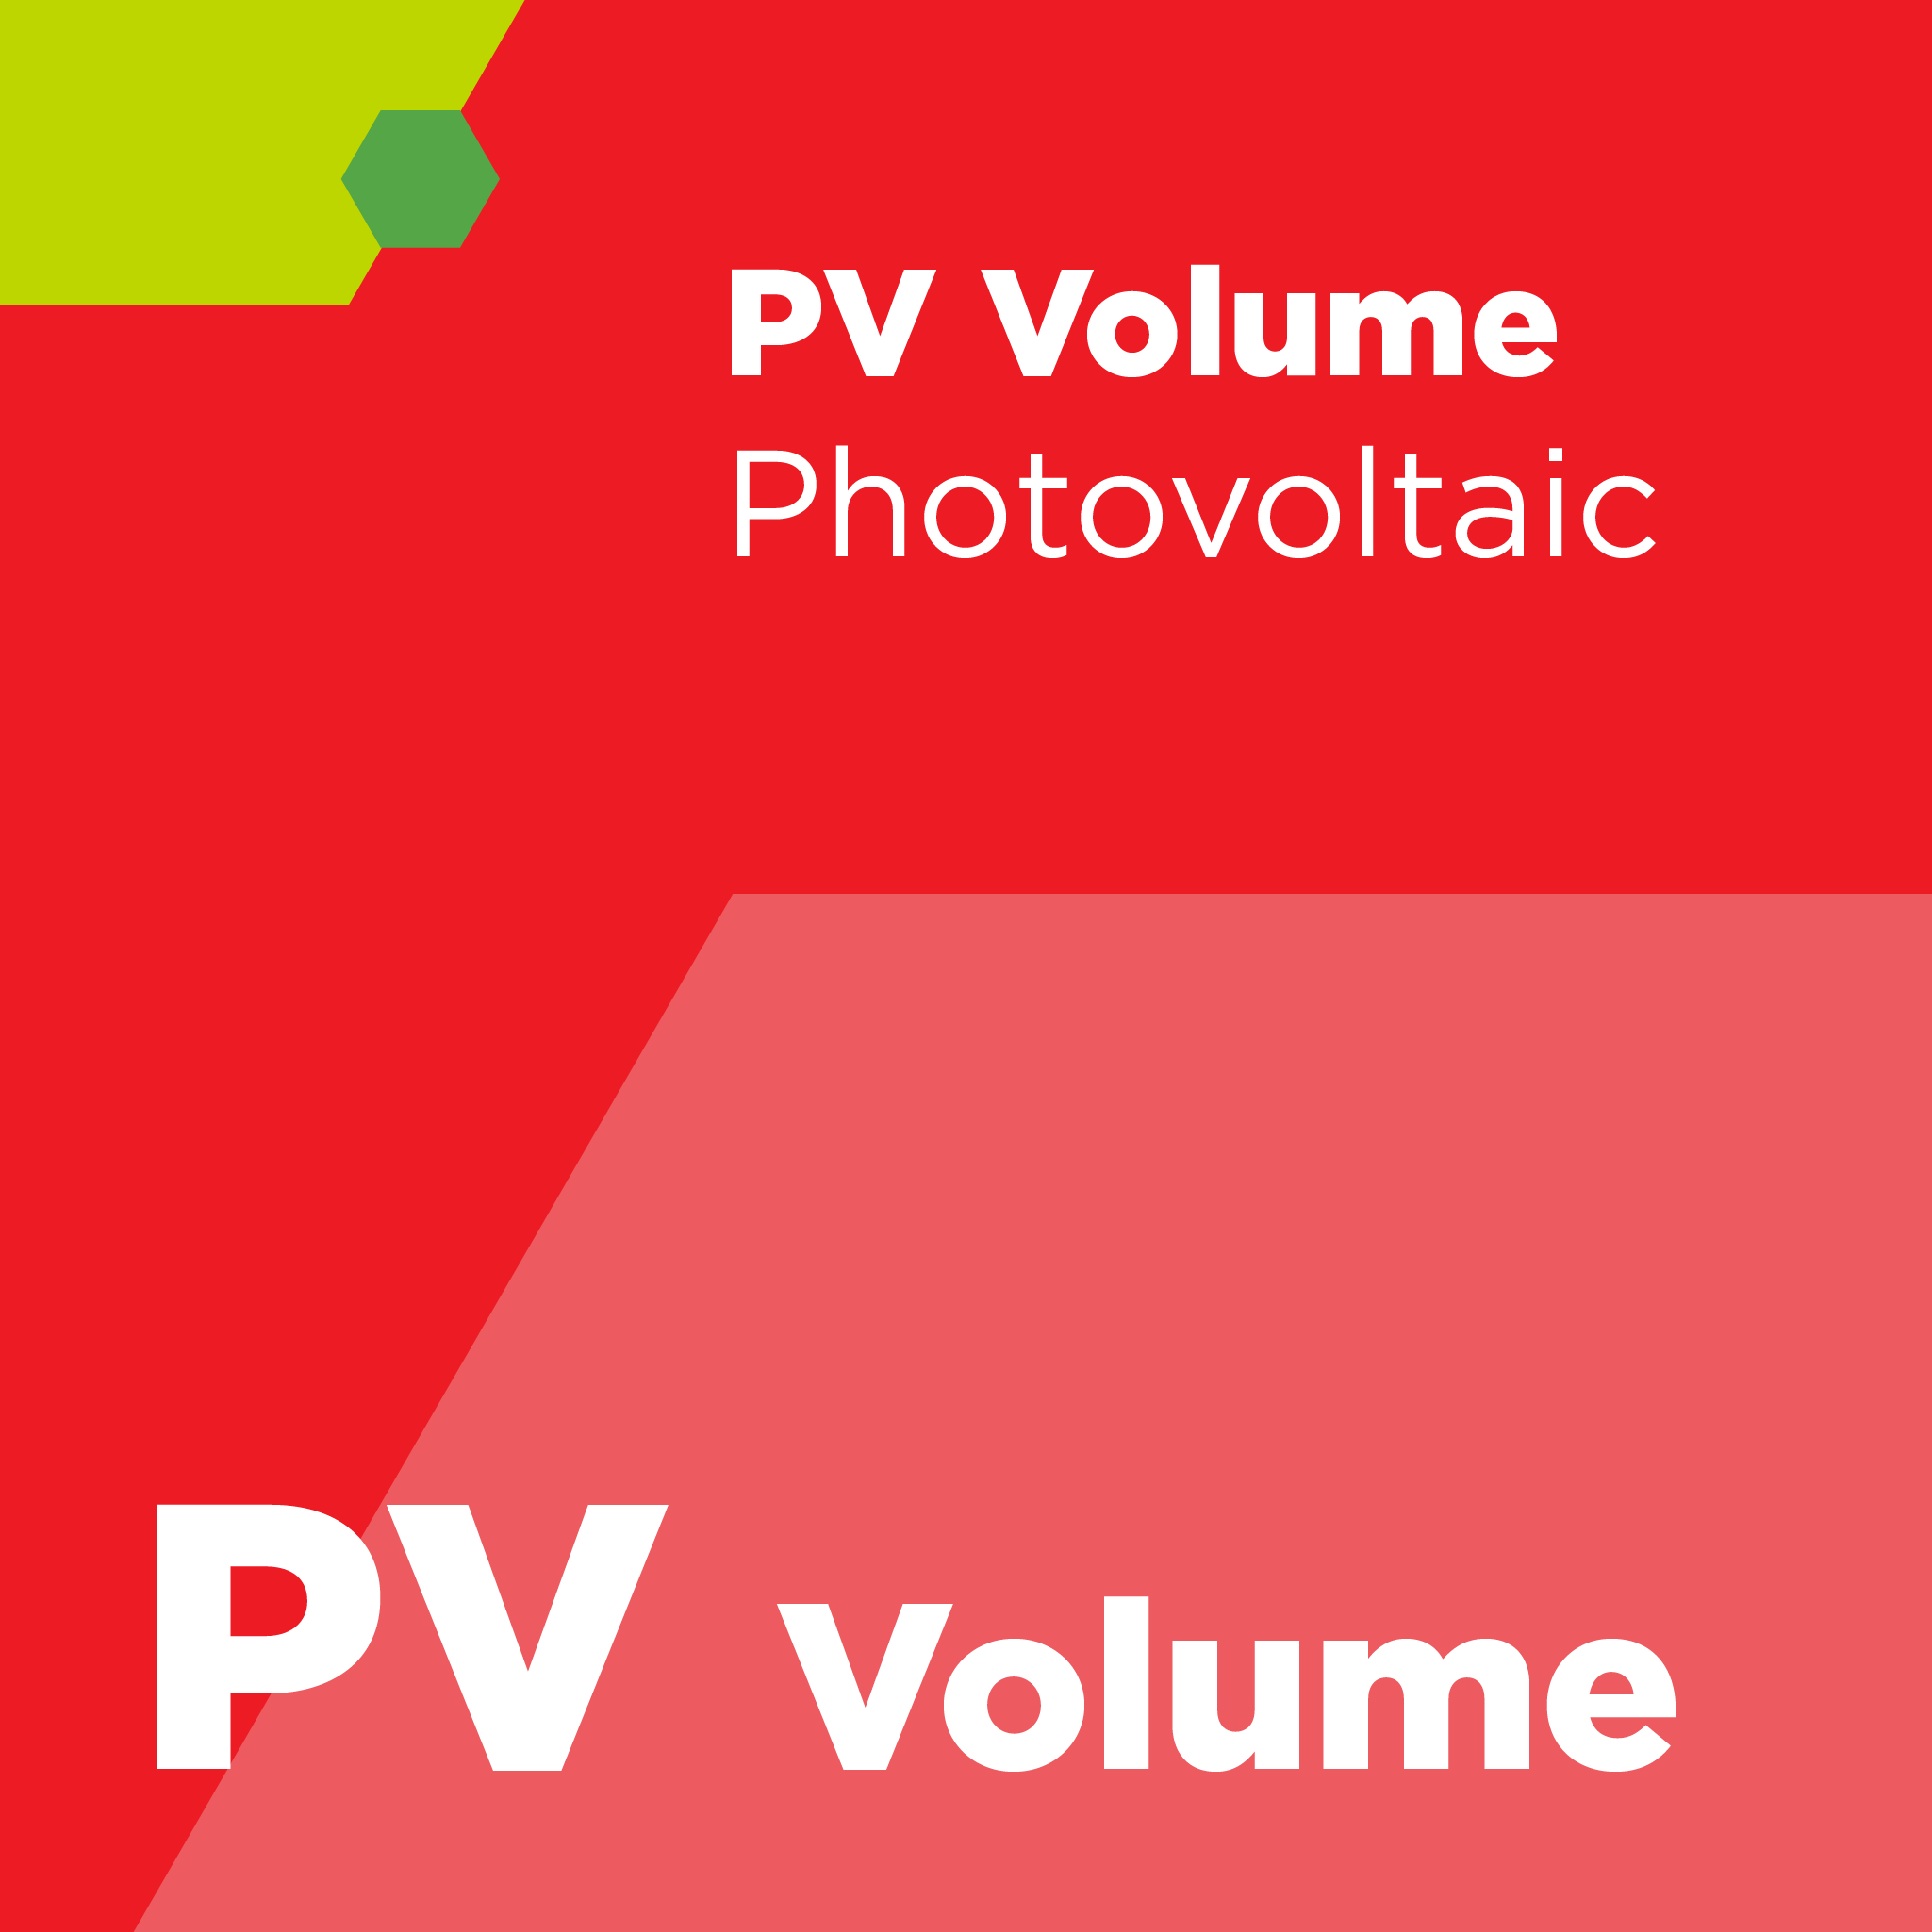 PV05600 - SEMI PV56 - Test Method for Performance Criteria of Photovoltaic (PV) Cells and Modules Package